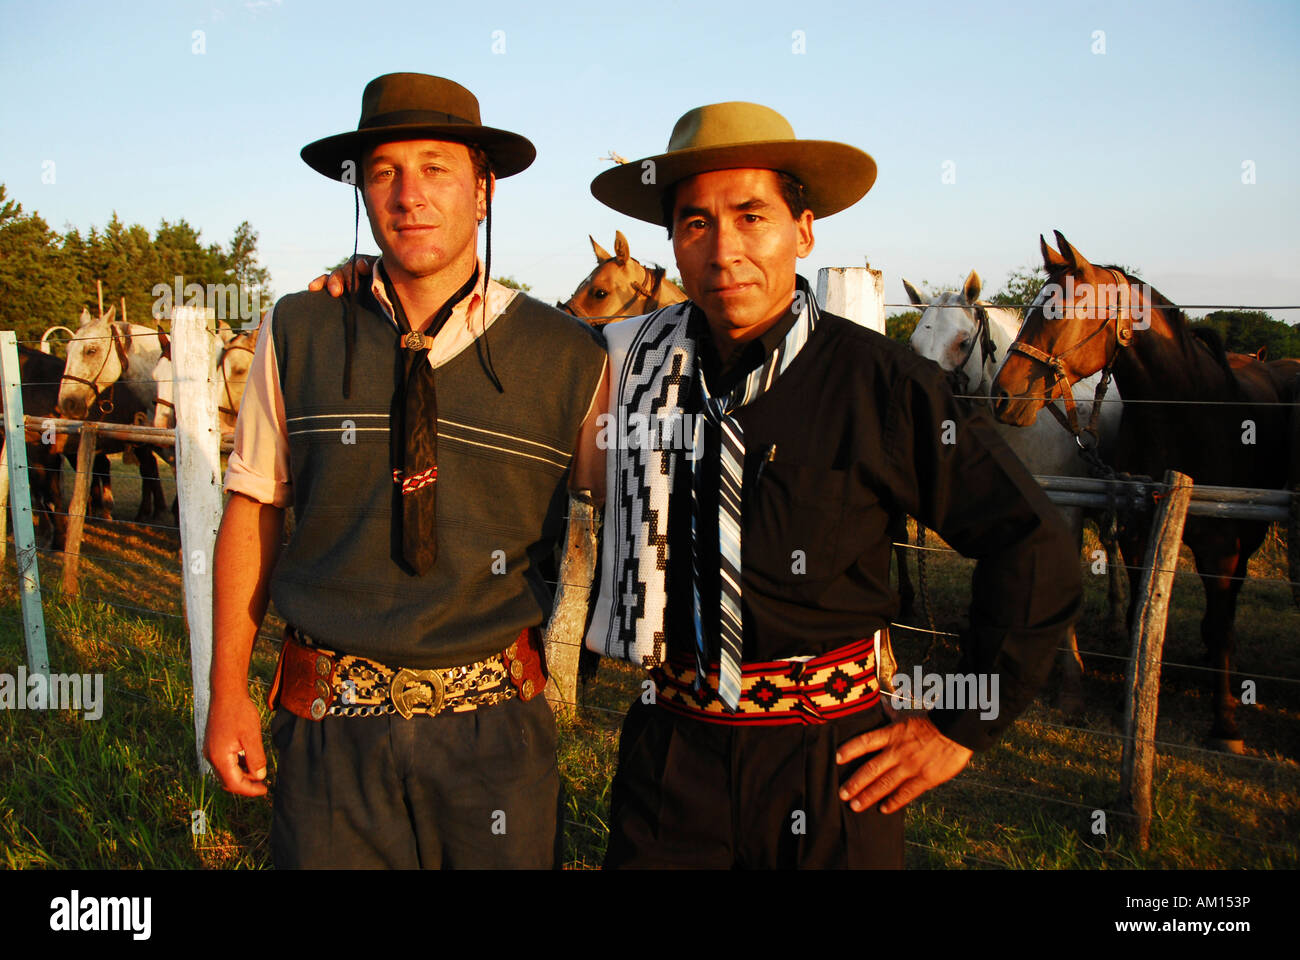 Gauchos with typical hats and scarfs, Diamante, Entre Rios province, Argentina Photo - Alamy